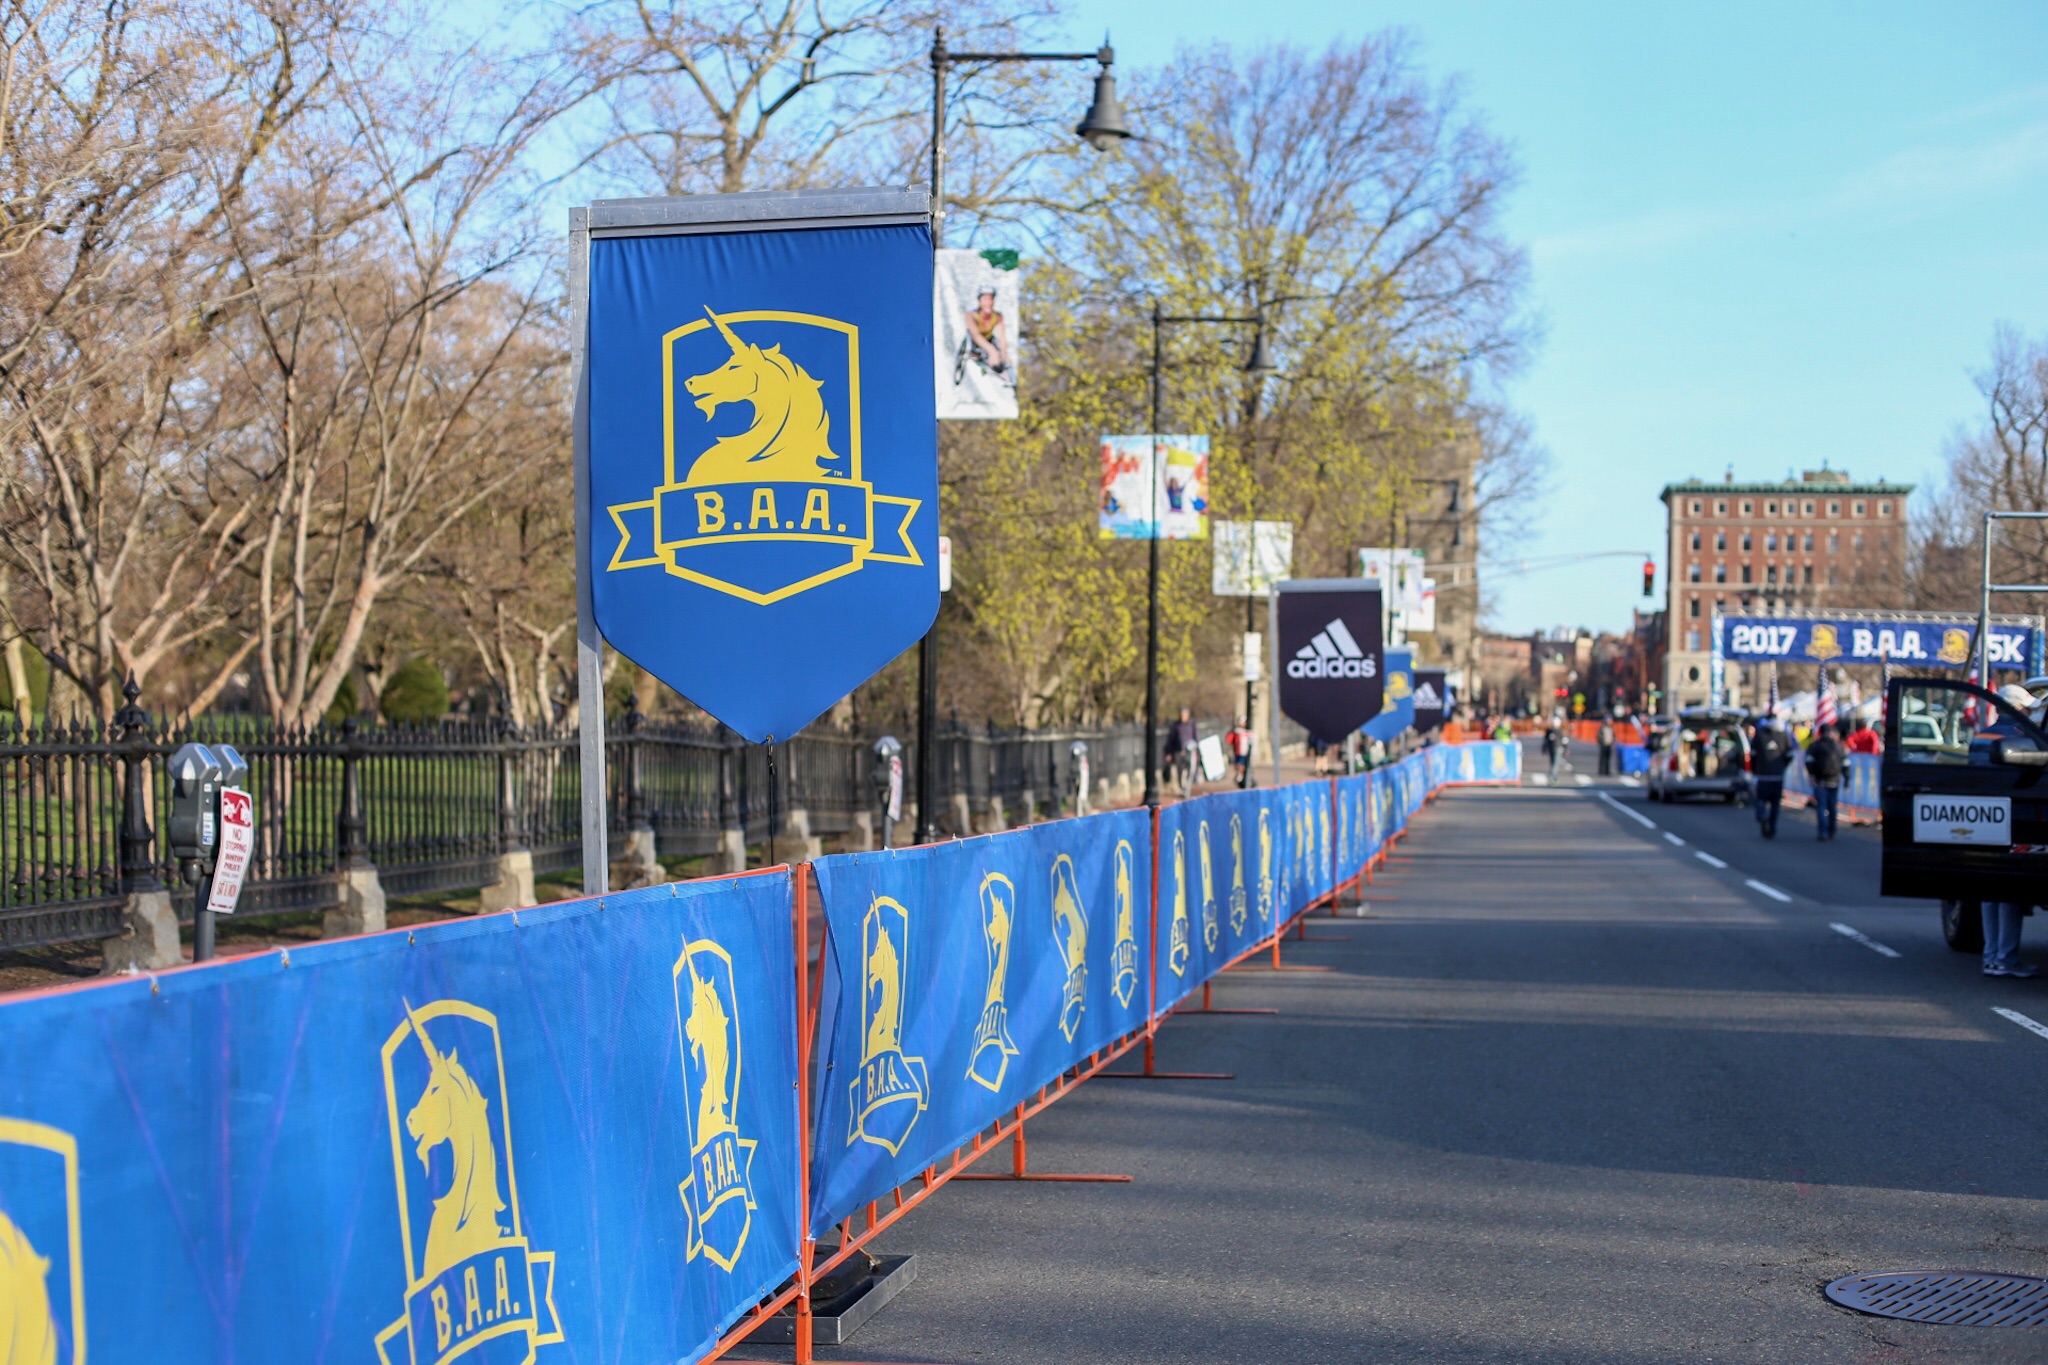 BAA 5K Sponsor Markers and Event Mesh Banners